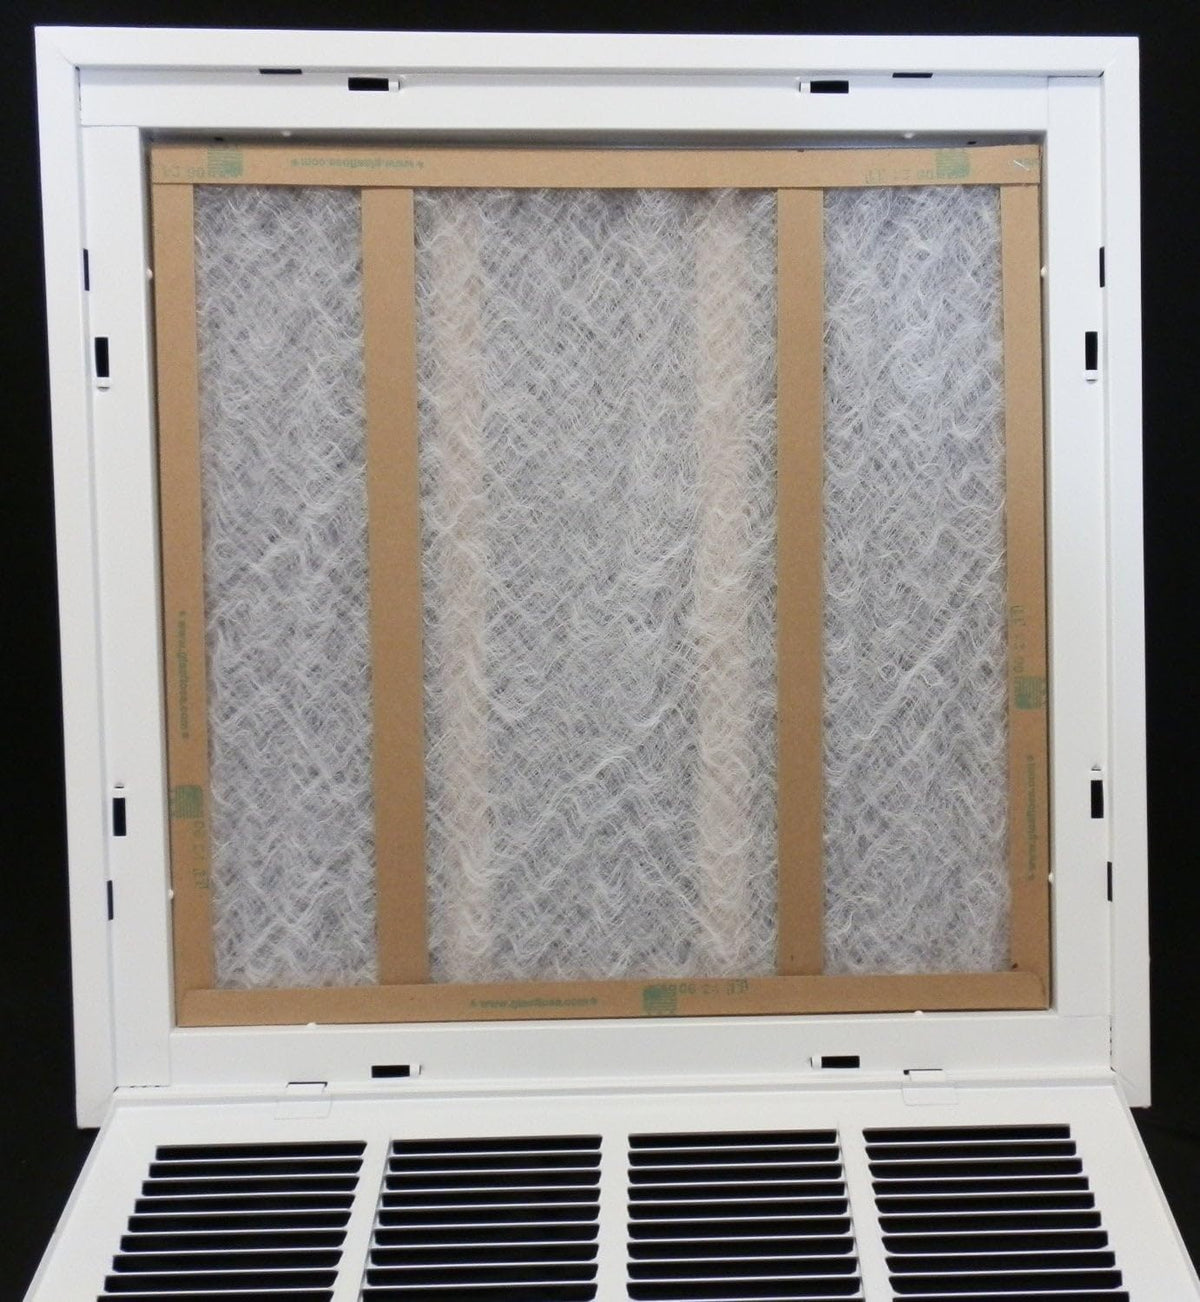 14&quot; X 8&quot; Steel Return Air Filter Grille for 1&quot; Filter - Removable Frame - * Filter Included * [Outer Dimensions: 16 5/8&quot; X 10 5/8&quot;]